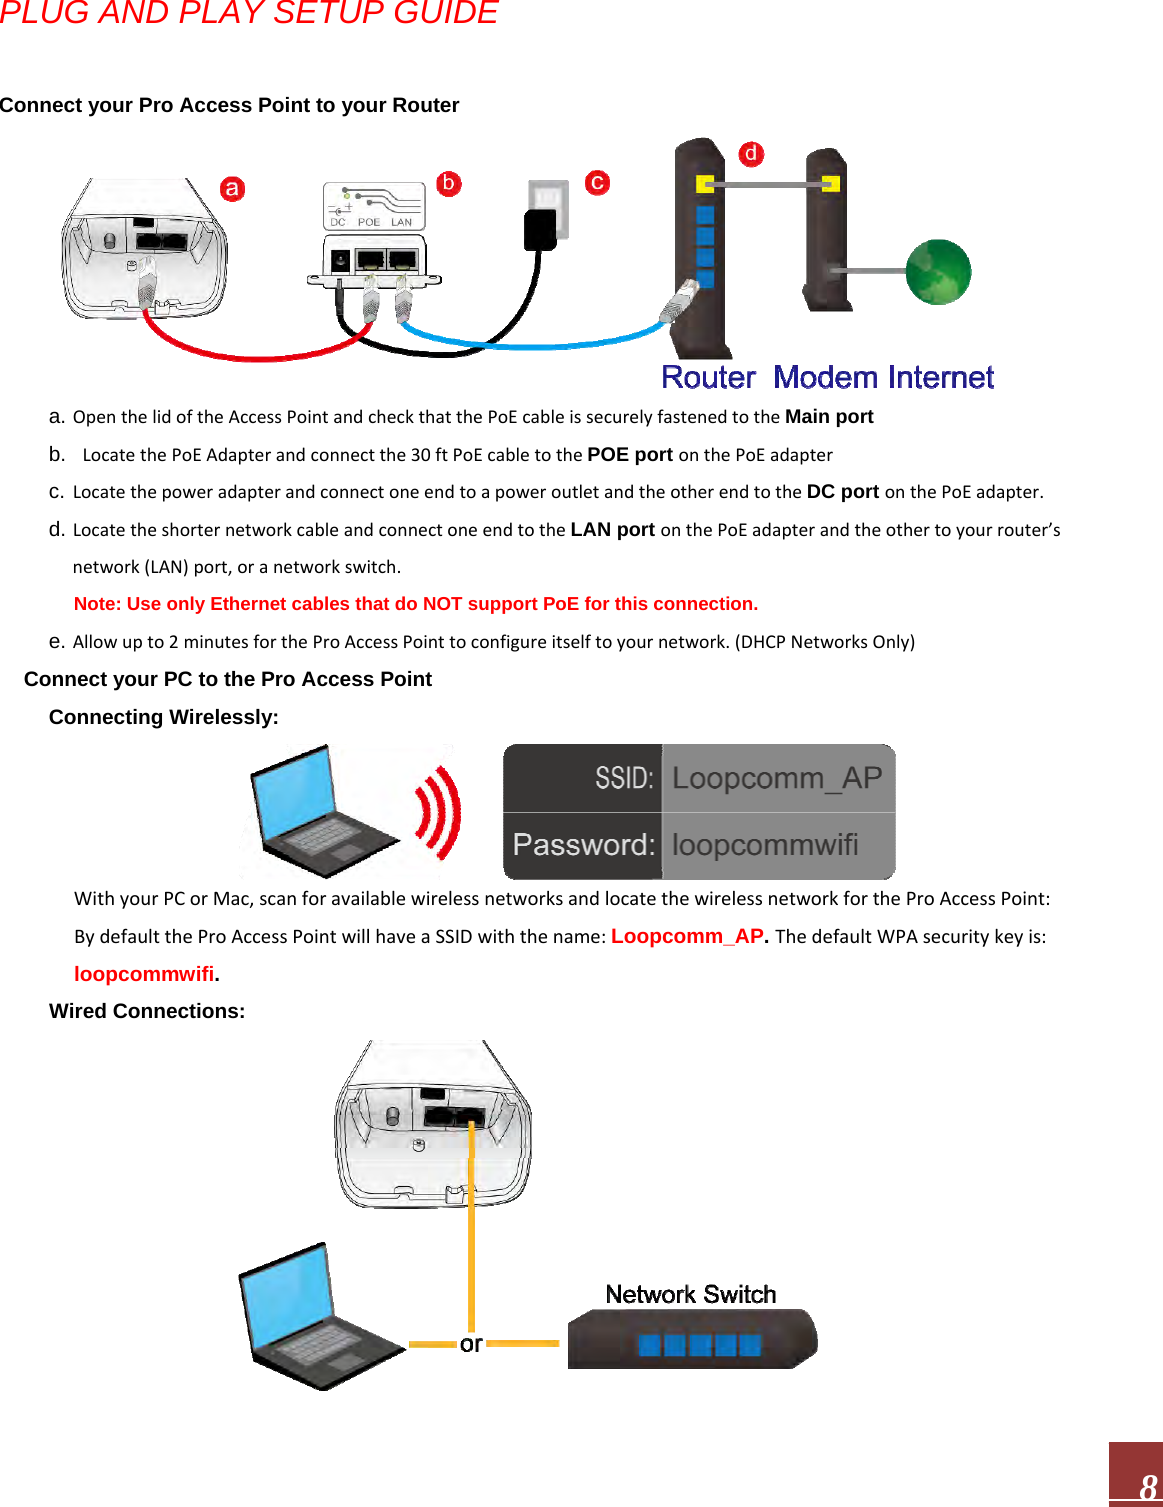  8PLUG AND PLAY SETUP GUIDE Connect your Pro Access Point to your Router a. OpenthelidoftheAccessPointandcheckthatthePoEcableissecurelyfastenedtotheMain port b. LocatethePoEAdapterandconnectthe30ftPoEcabletothePOE port onthePoEadapterc. LocatethepoweradapterandconnectoneendtoapoweroutletandtheotherendtotheDC port onthePoEadapter.d. LocatetheshorternetworkcableandconnectoneendtotheLAN port onthePoEadapterandtheothertoyourrouter’snetwork(LAN)port,oranetworkswitch.Note: Use only Ethernet cables that do NOT support PoE for this connection.e. Allowupto2minutesfortheProAccessPointtoconfigureitselftoyournetwork.(DHCPNetworksOnly) Connect your PC to the Pro Access Point Connecting Wirelessly: WithyourPCorMac,scanforavailablewirelessnetworksandlocatethewirelessnetworkfortheProAccessPoint:BydefaulttheProAccessPointwillhaveaSSIDwiththename:Loopcomm_AP. ThedefaultWPAsecuritykeyis:loopcommwifi. Wired Connections: 